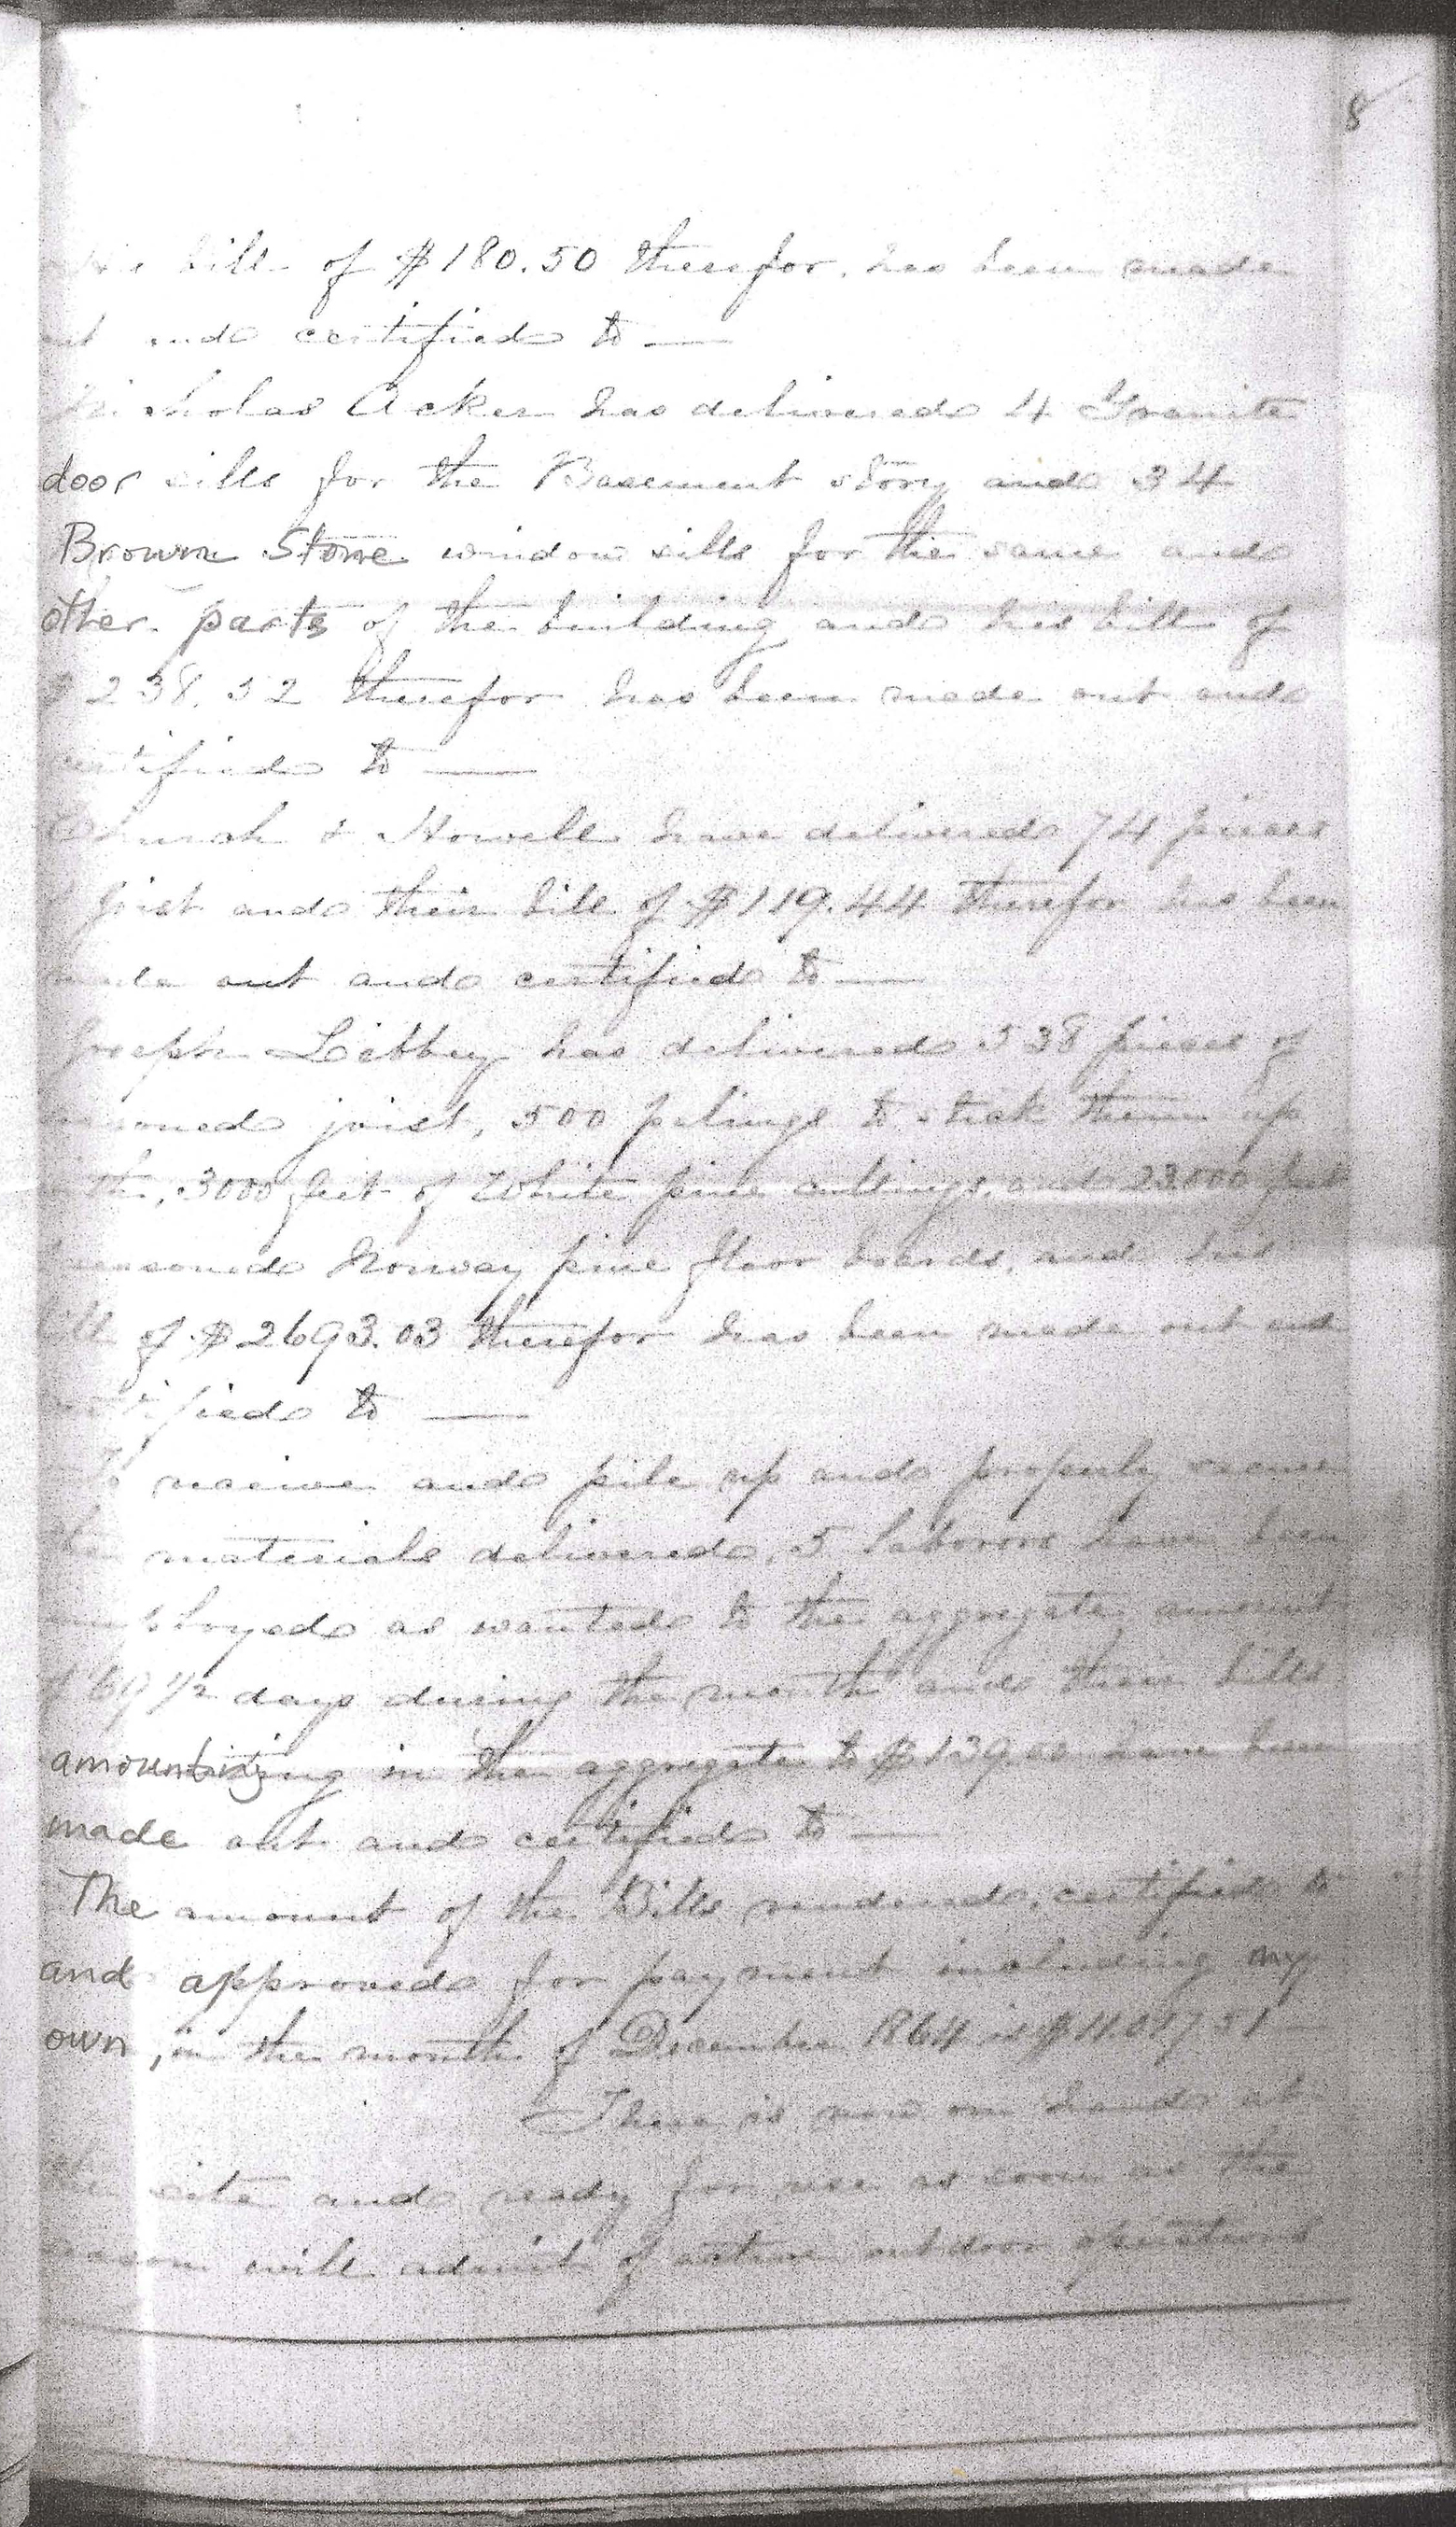 Monthly Report of the Superintendent of Construction, January 2, 1865, Page 3 of 4